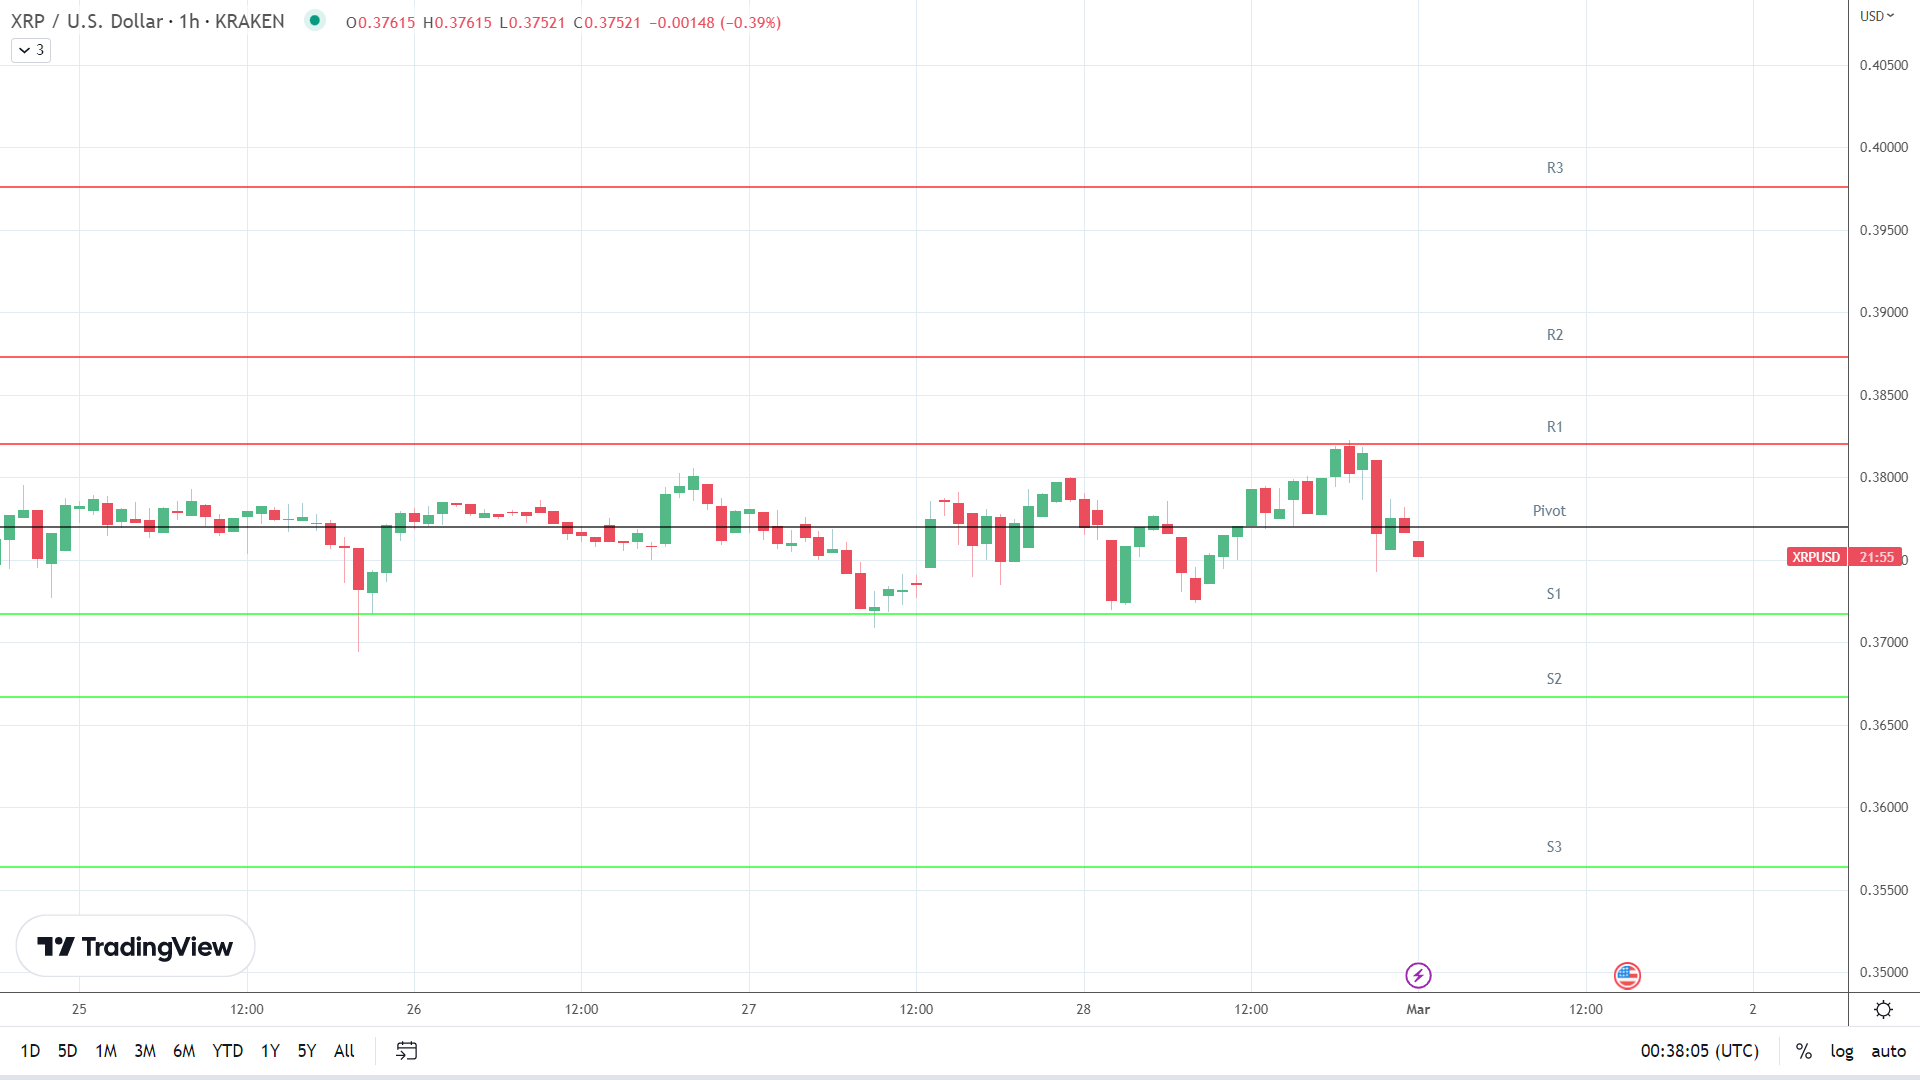 XRP support levels in play below the pivot.